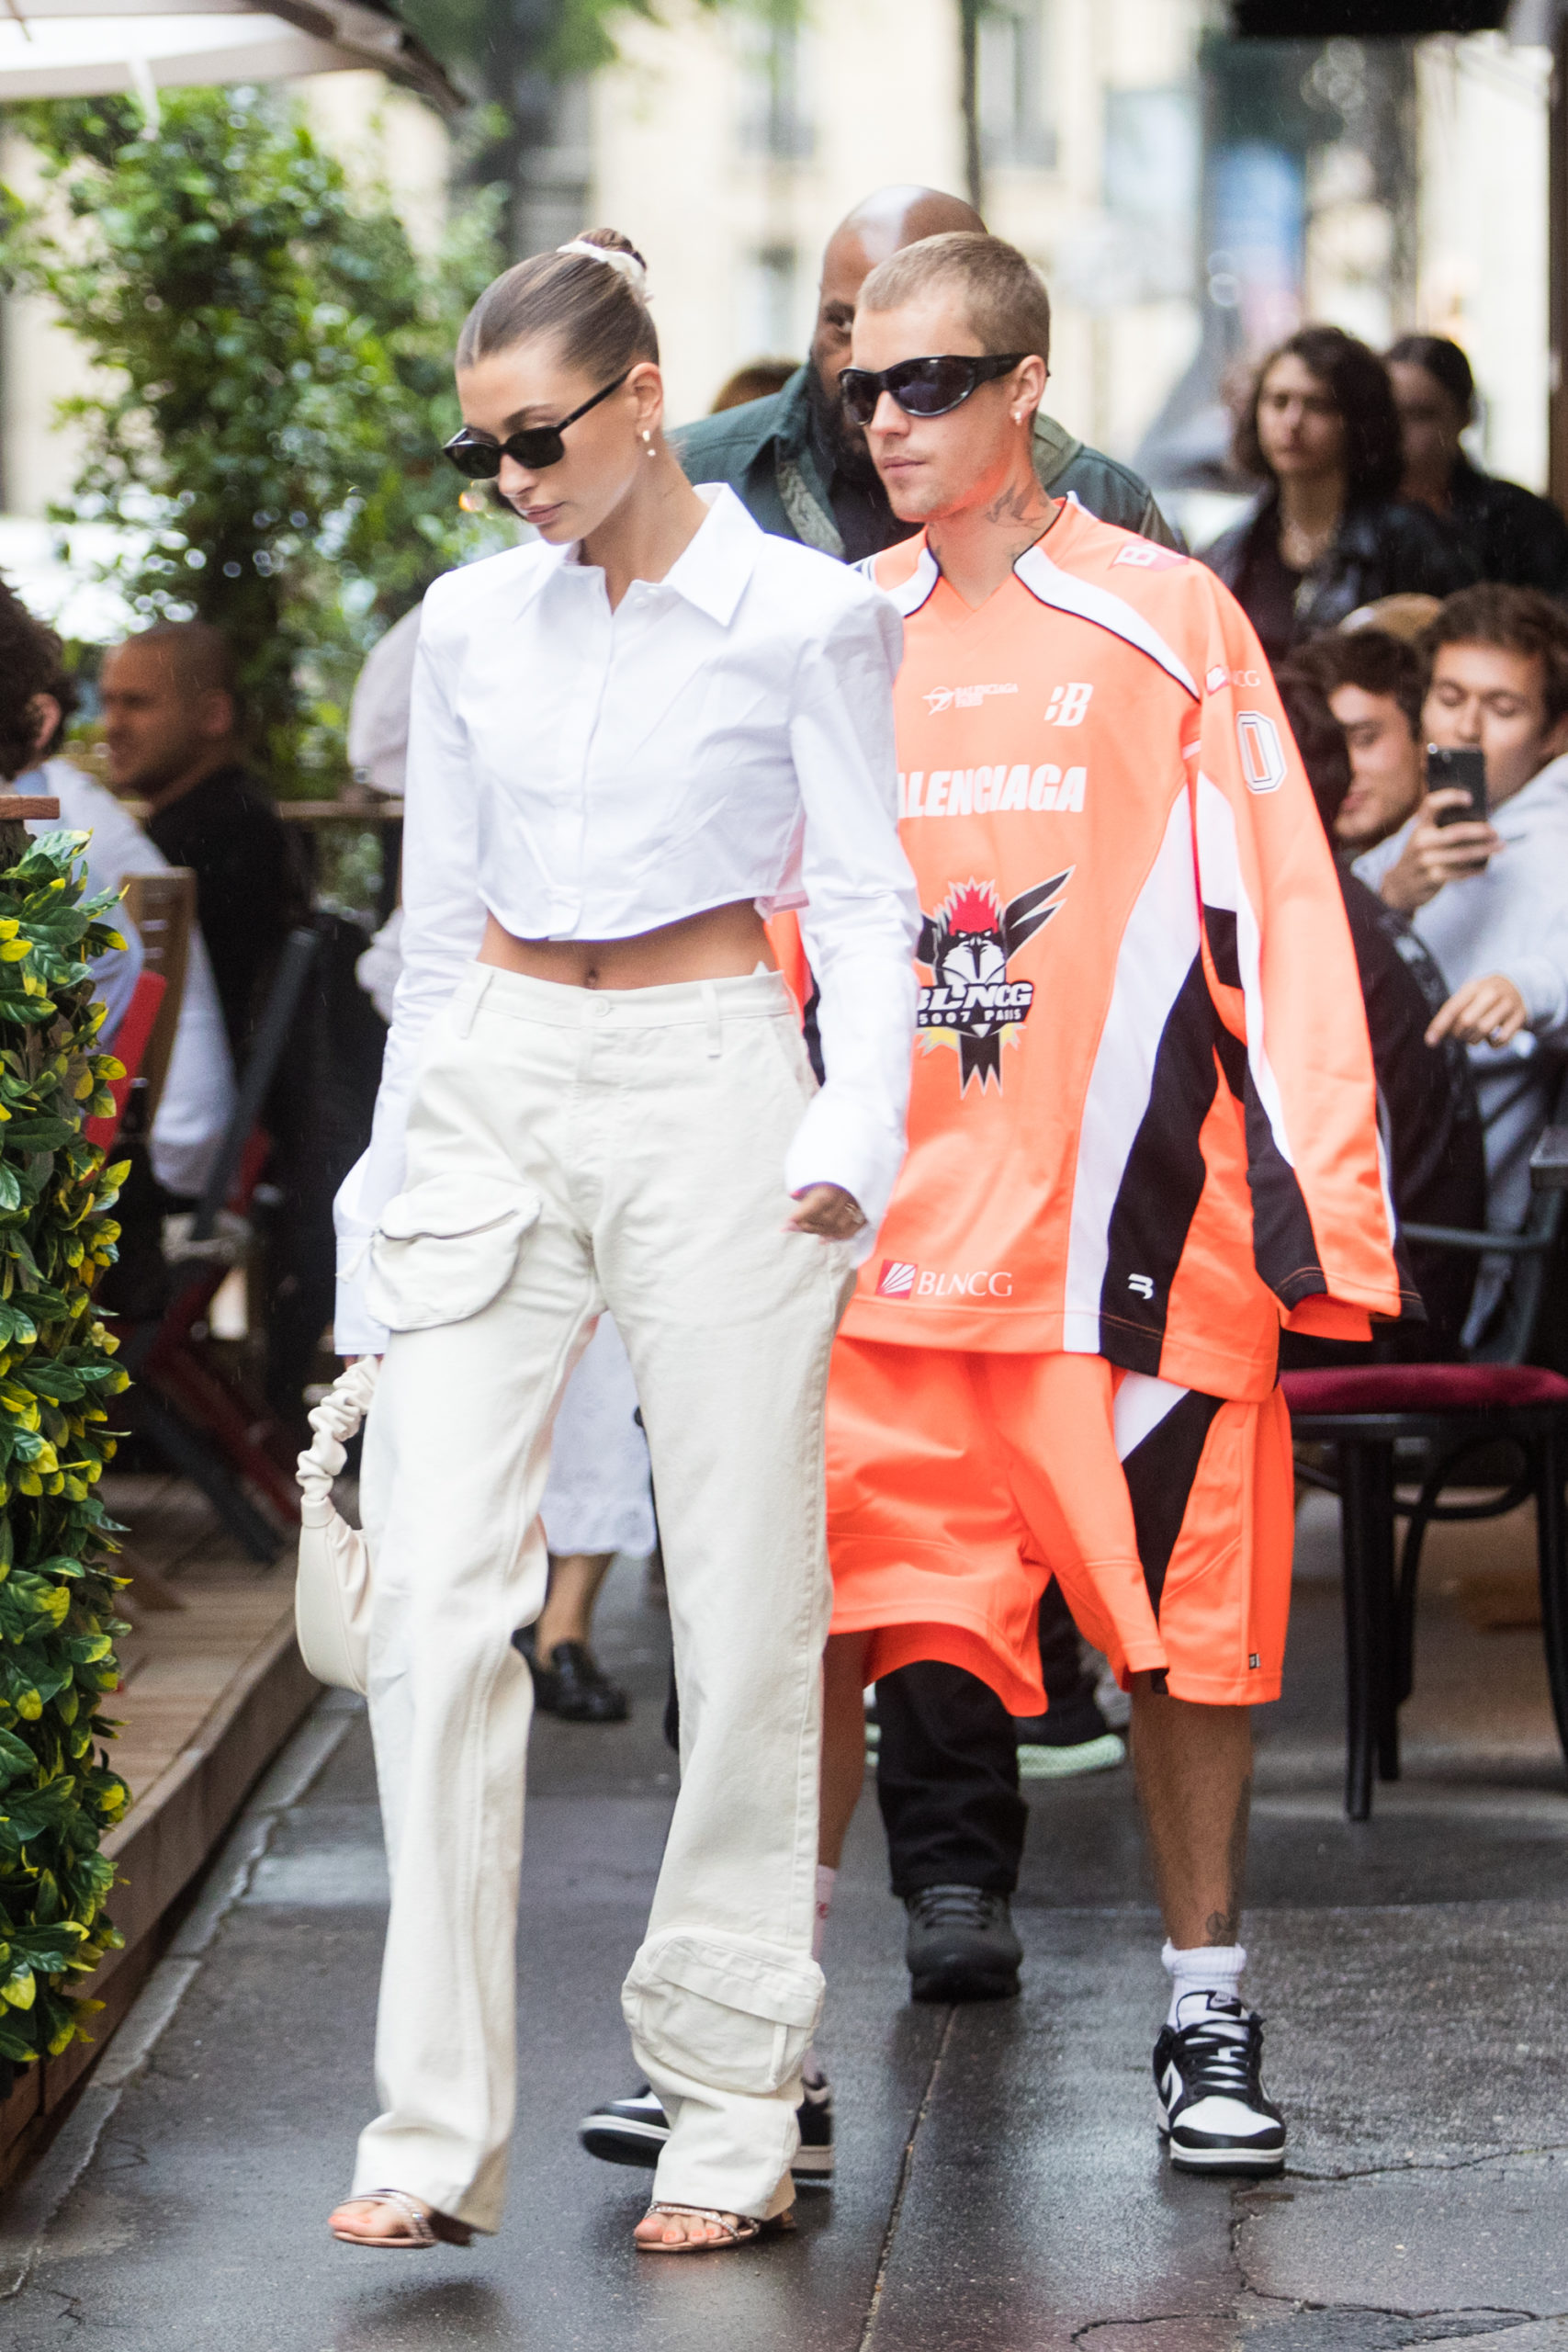 SPOTTED: Justin Bieber in Balenciaga with Hailey Bieber in Paris – PAUSE  Online